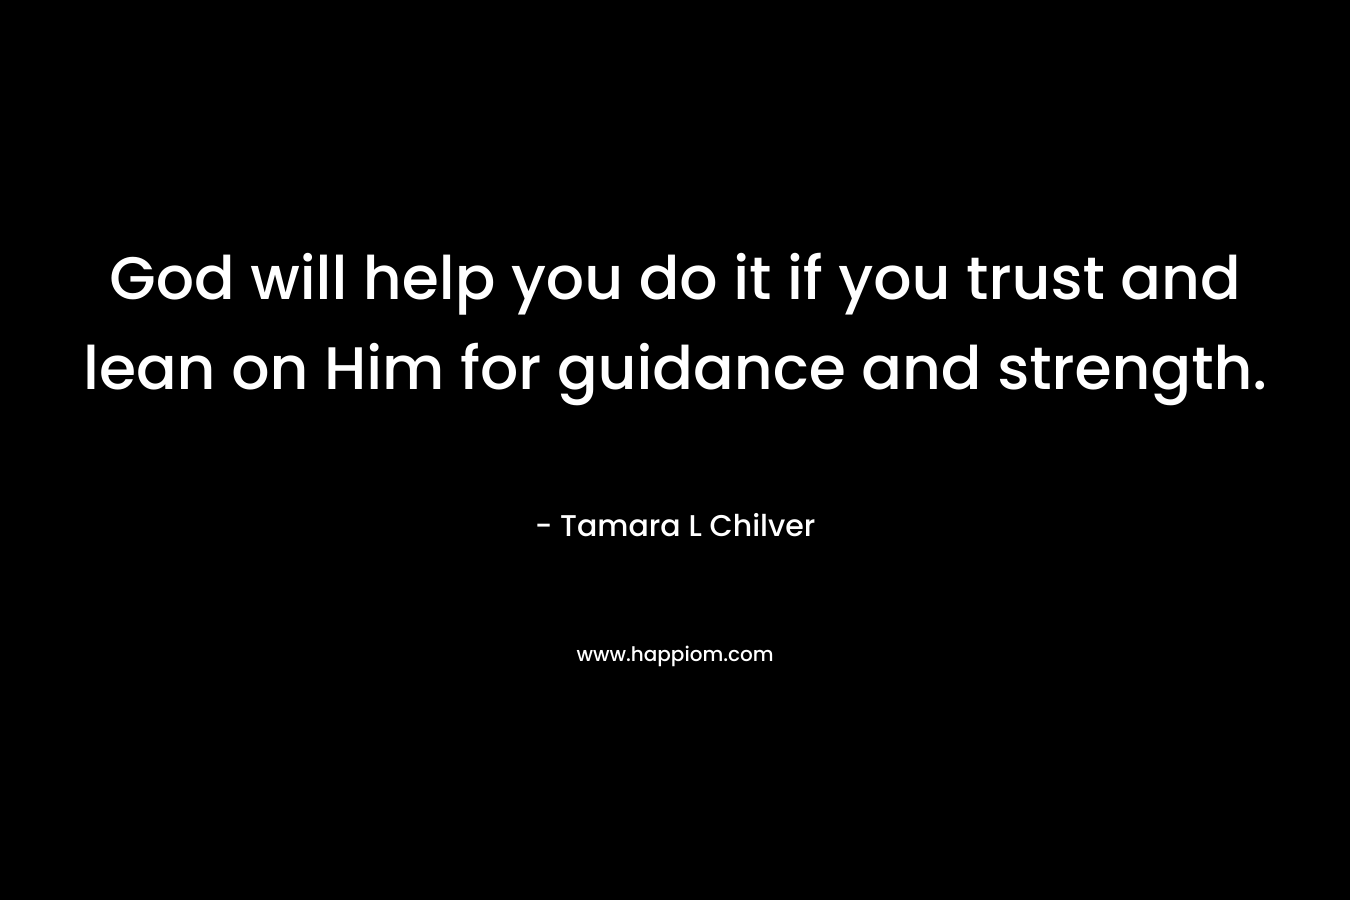 God will help you do it if you trust and lean on Him for guidance and strength.